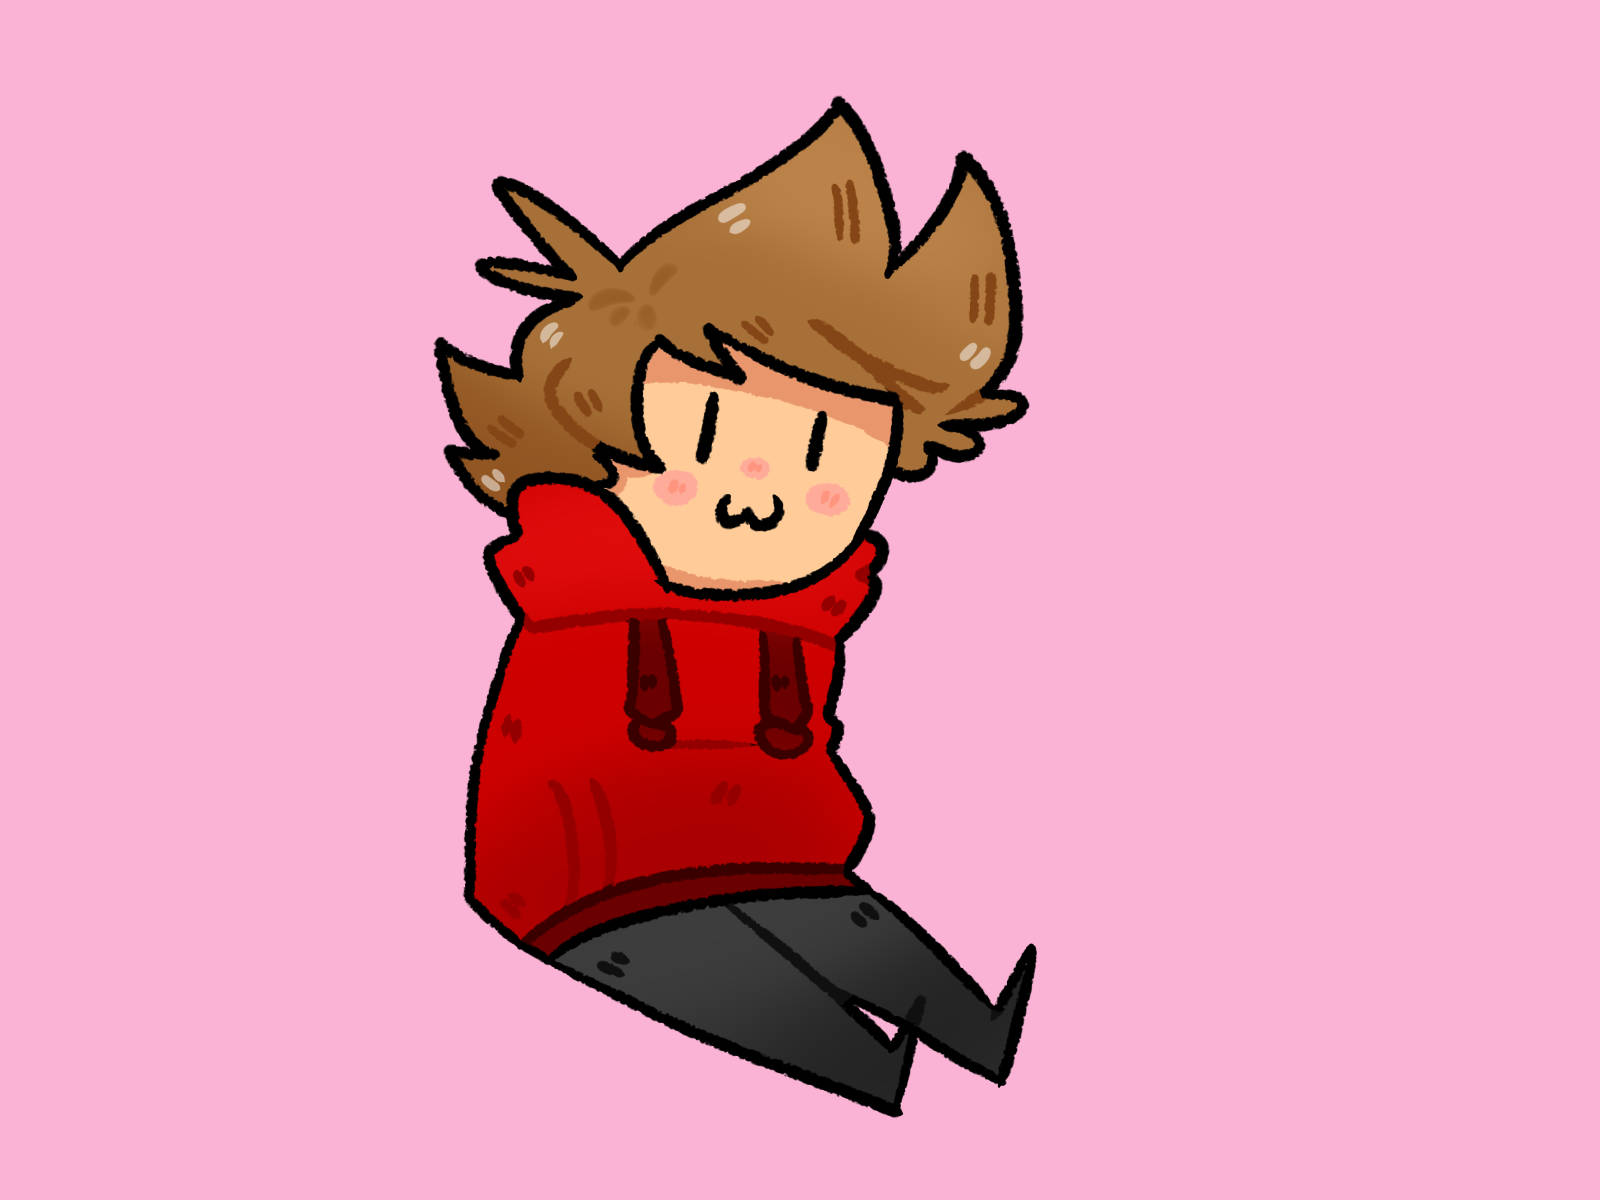 Tord From Eddsworld Wearing Red Hoody